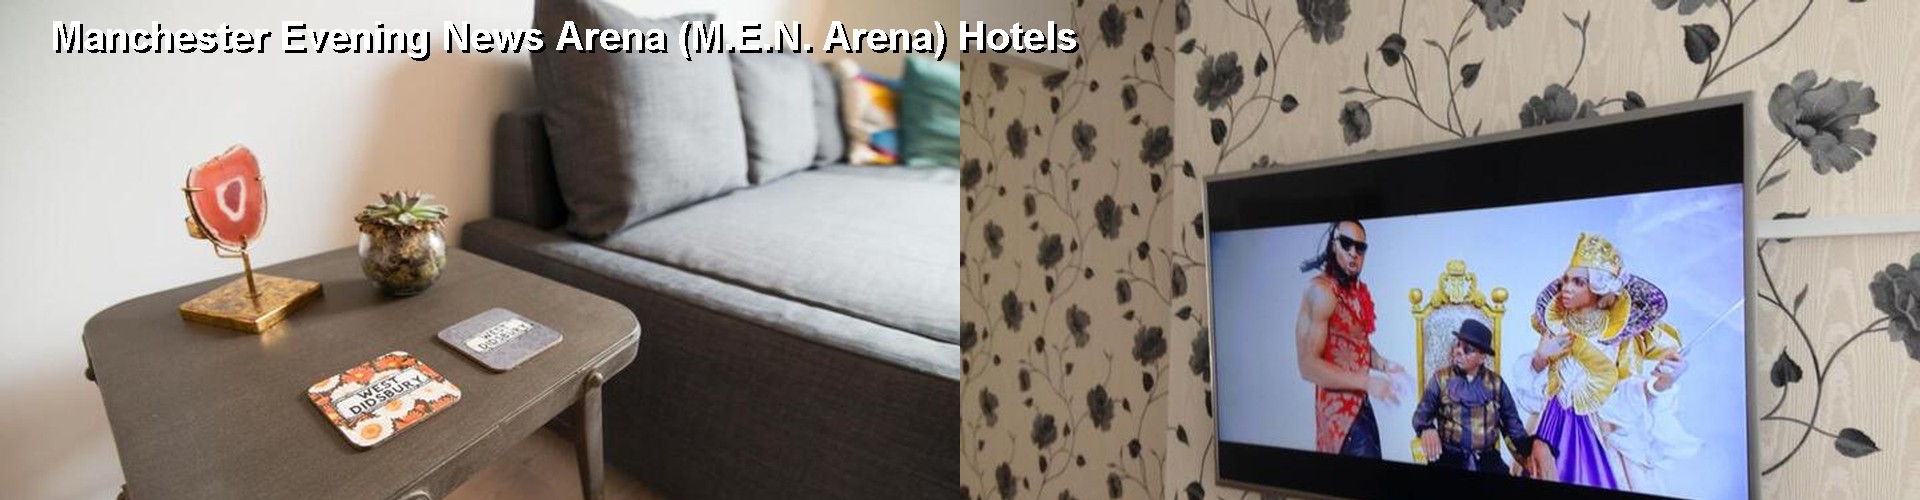 5 Best Hotels near Manchester Evening News Arena (M.E.N. Arena)